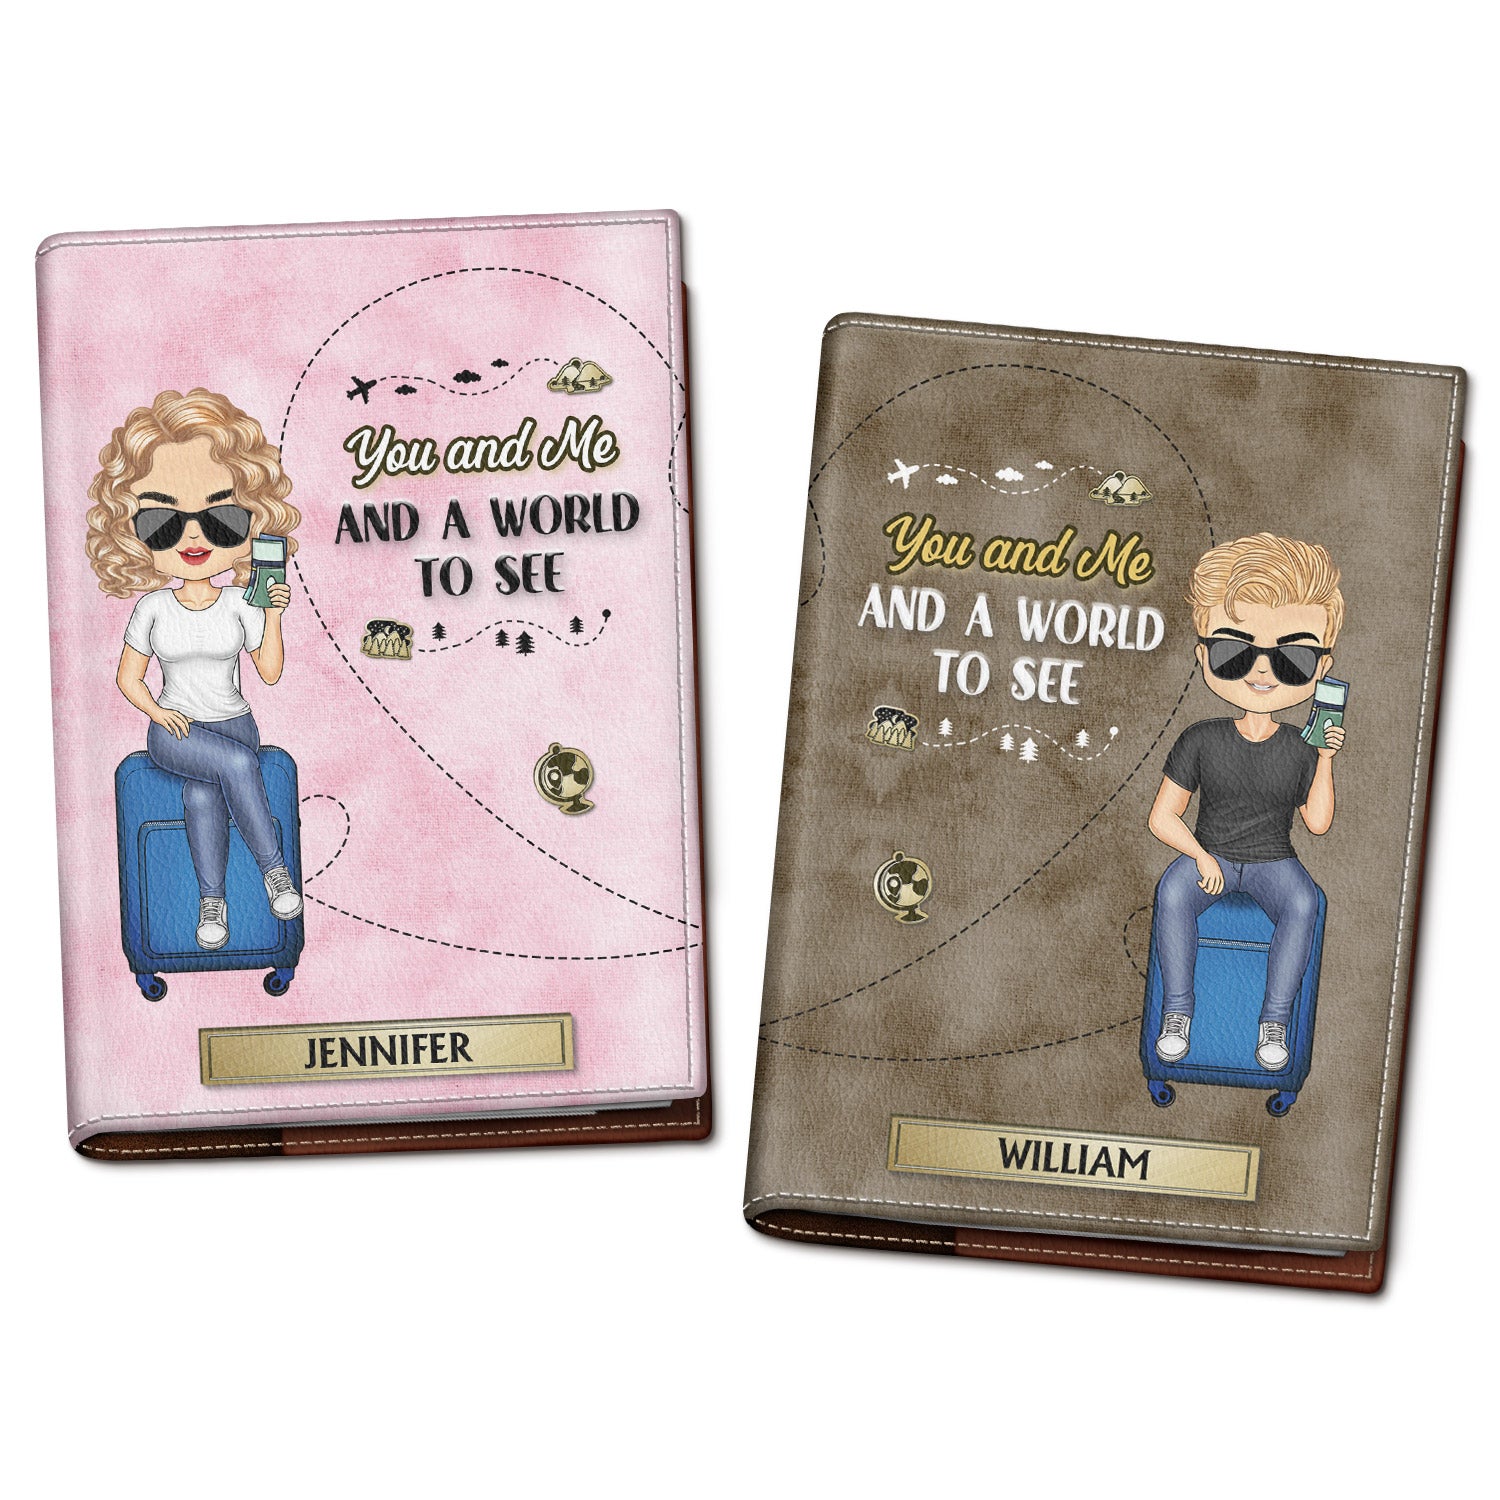 You And Me And A World To See - Gift For Couples, Travel Lovers - Personalized Custom Passport Cover, Passport Holder